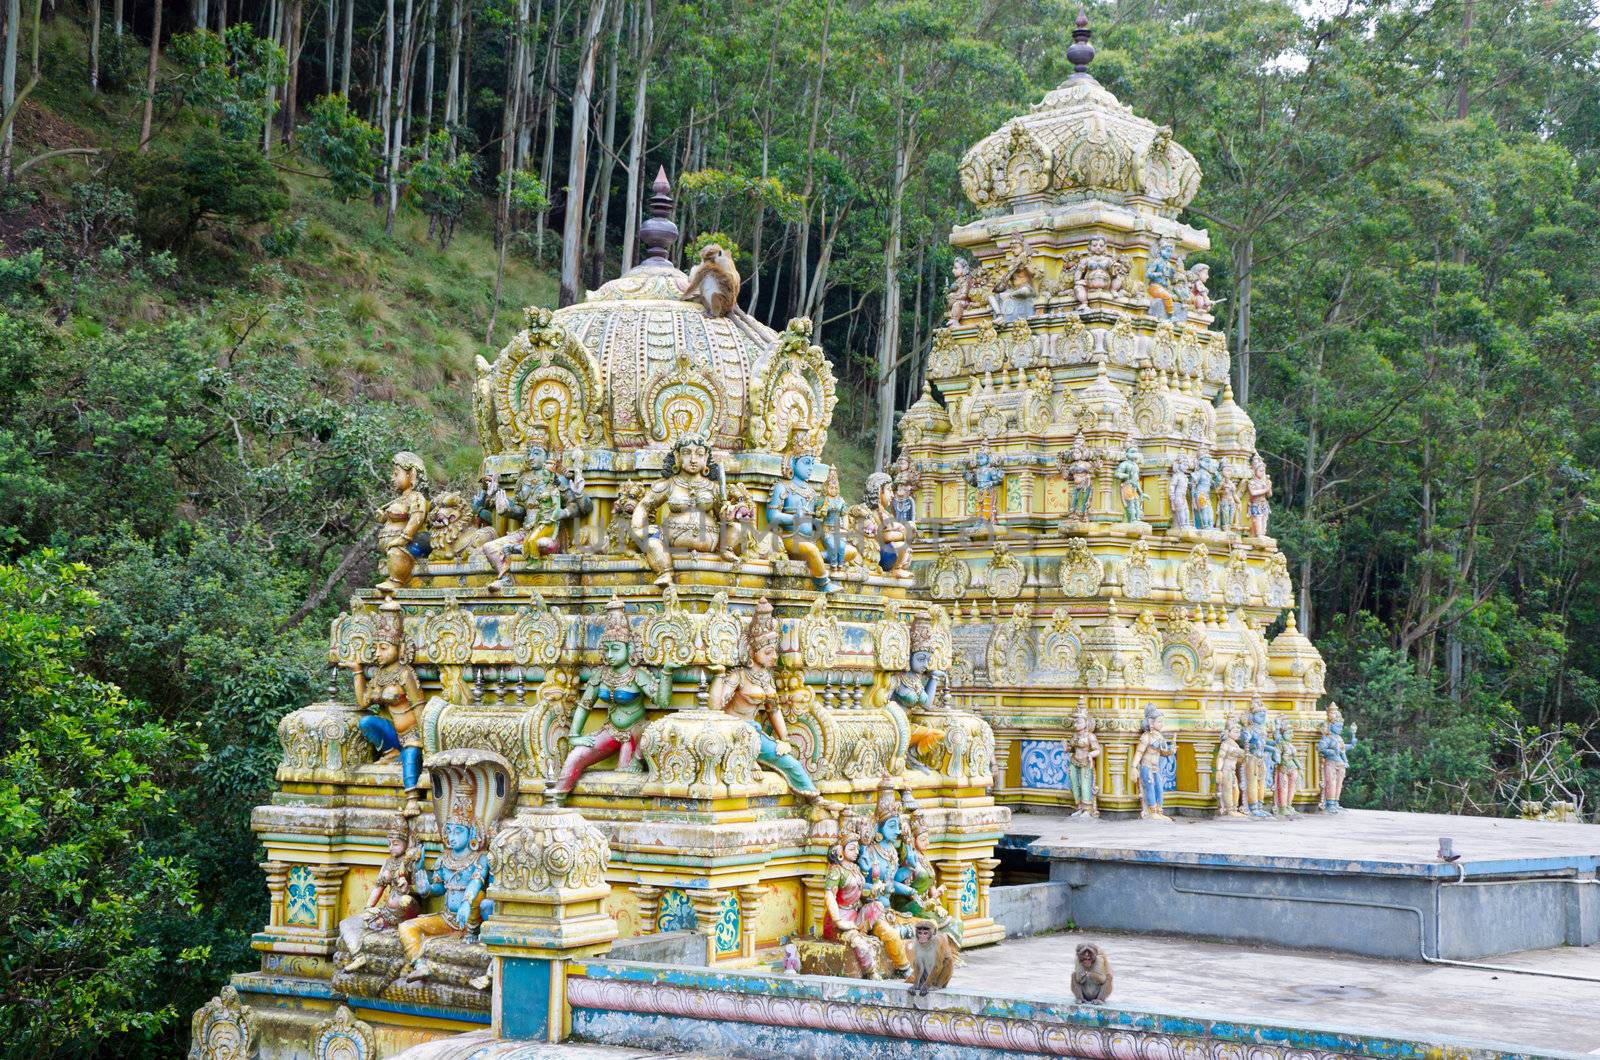 MOUNTAINS OF SRI LANKA DECEMBER 8. external decoration of a Hindu temple in the mountains of Sri Lanka, december 8, 2011.